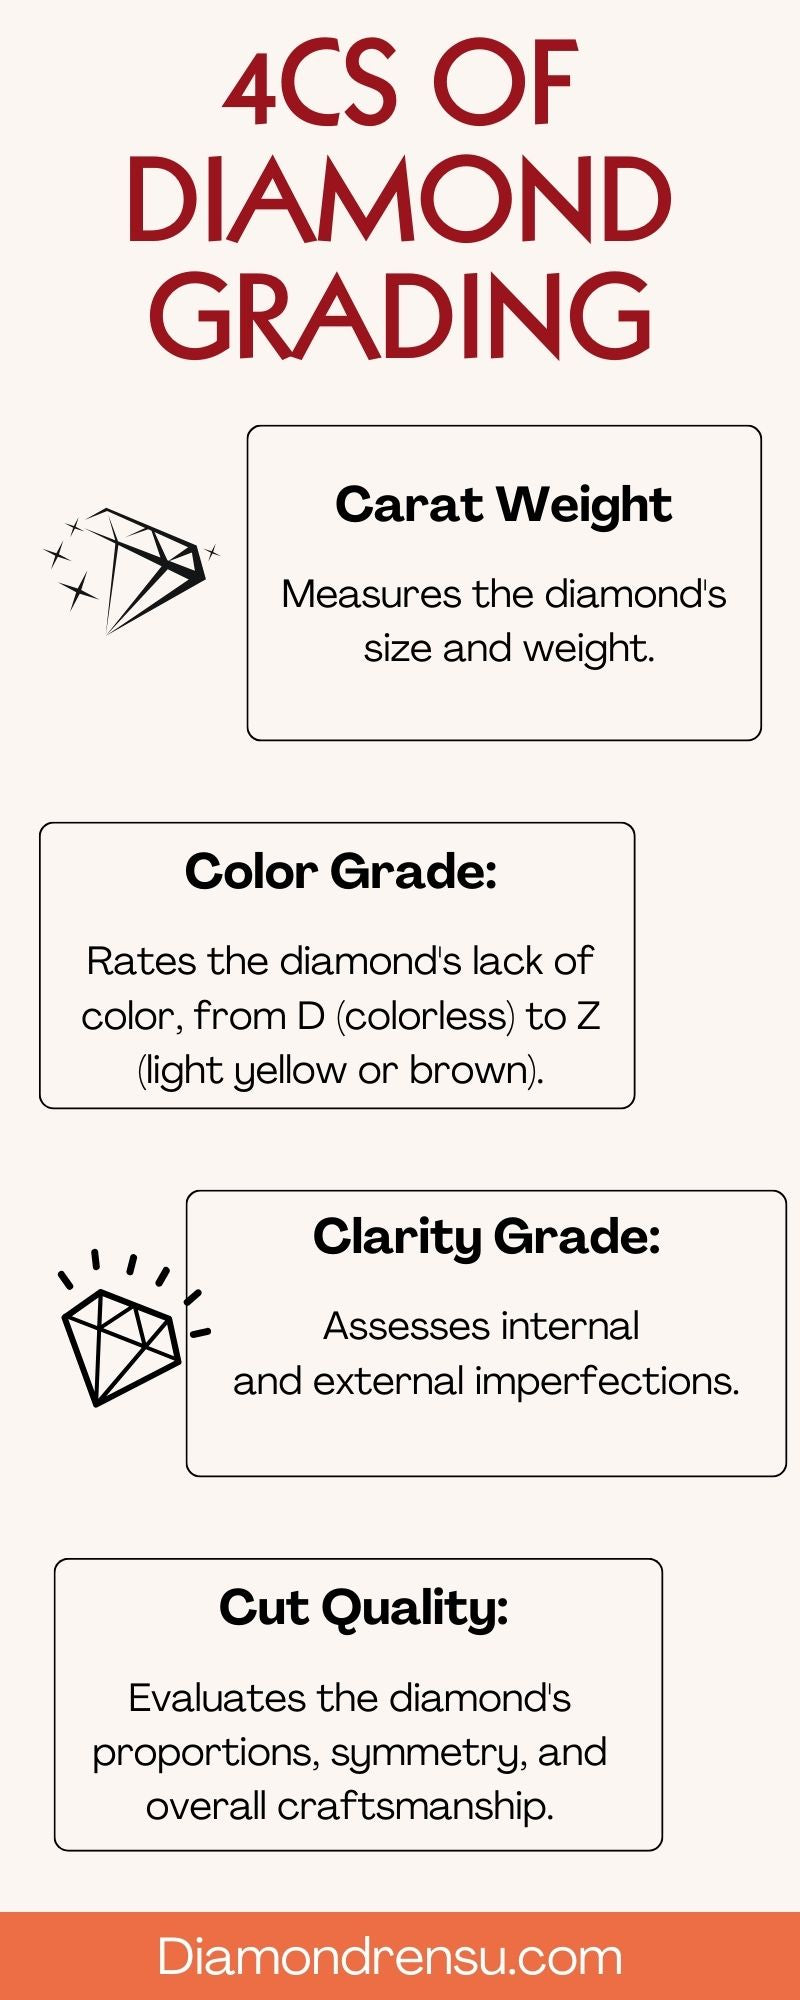 The chart showing four aspects on which a diamond is graded